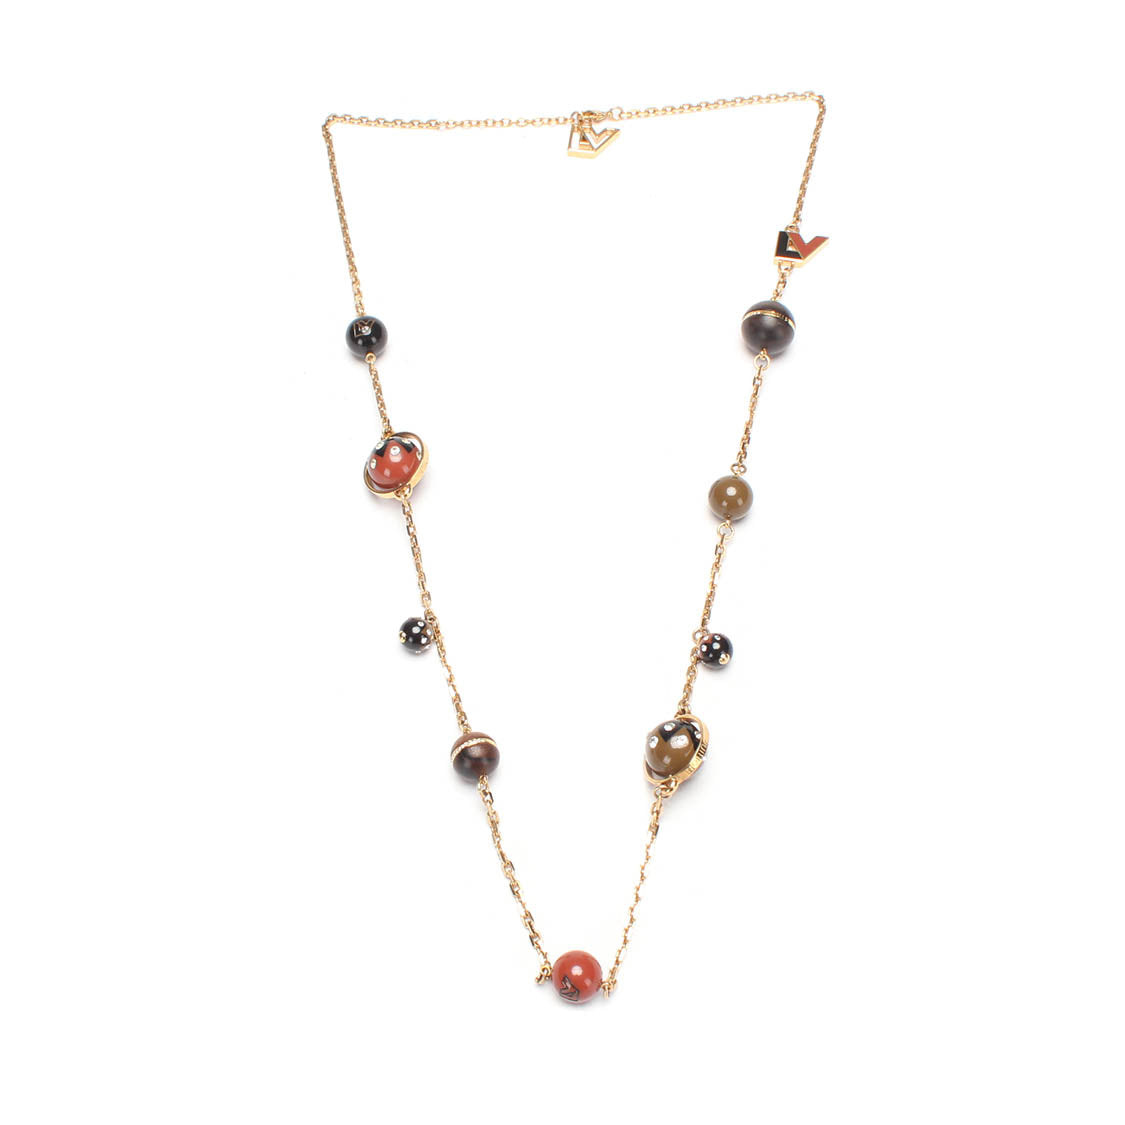 Louis Vuitton Crystal, Resin, & Wood LV Ball Charm Necklace Plastic Necklace in Bad condition